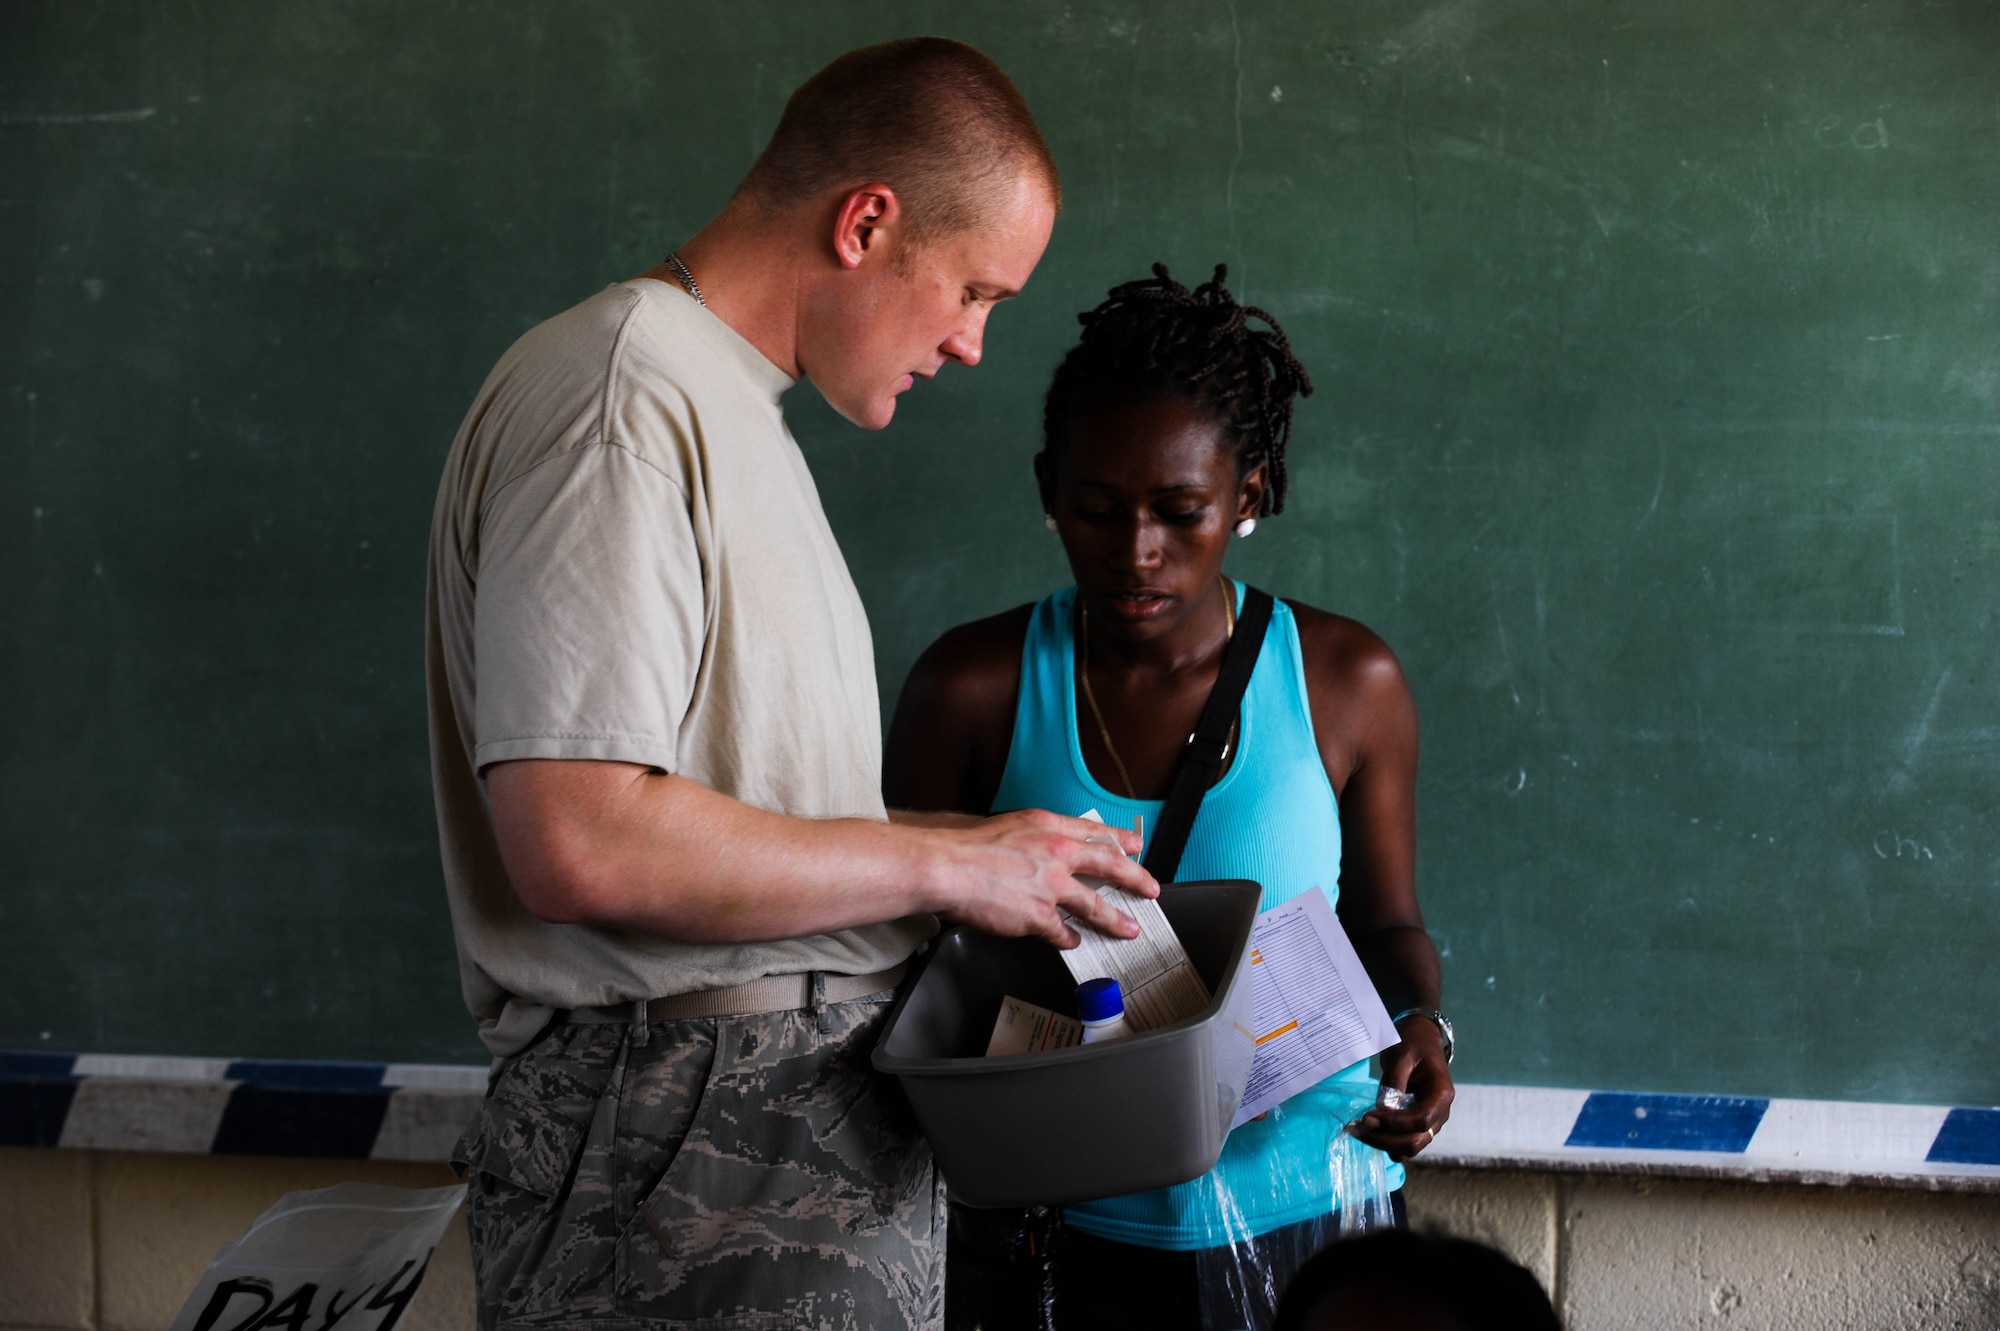 BATALLA, Honduras -- Air Force Staff Sergeant Thomas Delperdang, Medical Element Pharmacy Technician explains to a patient the prescription medication she is receiving with proper instructions on use during JTF-Bravo's most recent medical readiness and training exercise. In partnership with the Honduran Ministry of Health and Honduran Military, JTF-Bravo delivered medical care to 1,774 patients in Batalla and Wawina during the MEDRETE, April 18-21. (U.S. Air Force Photo/1st Lt. Christopher Diaz)